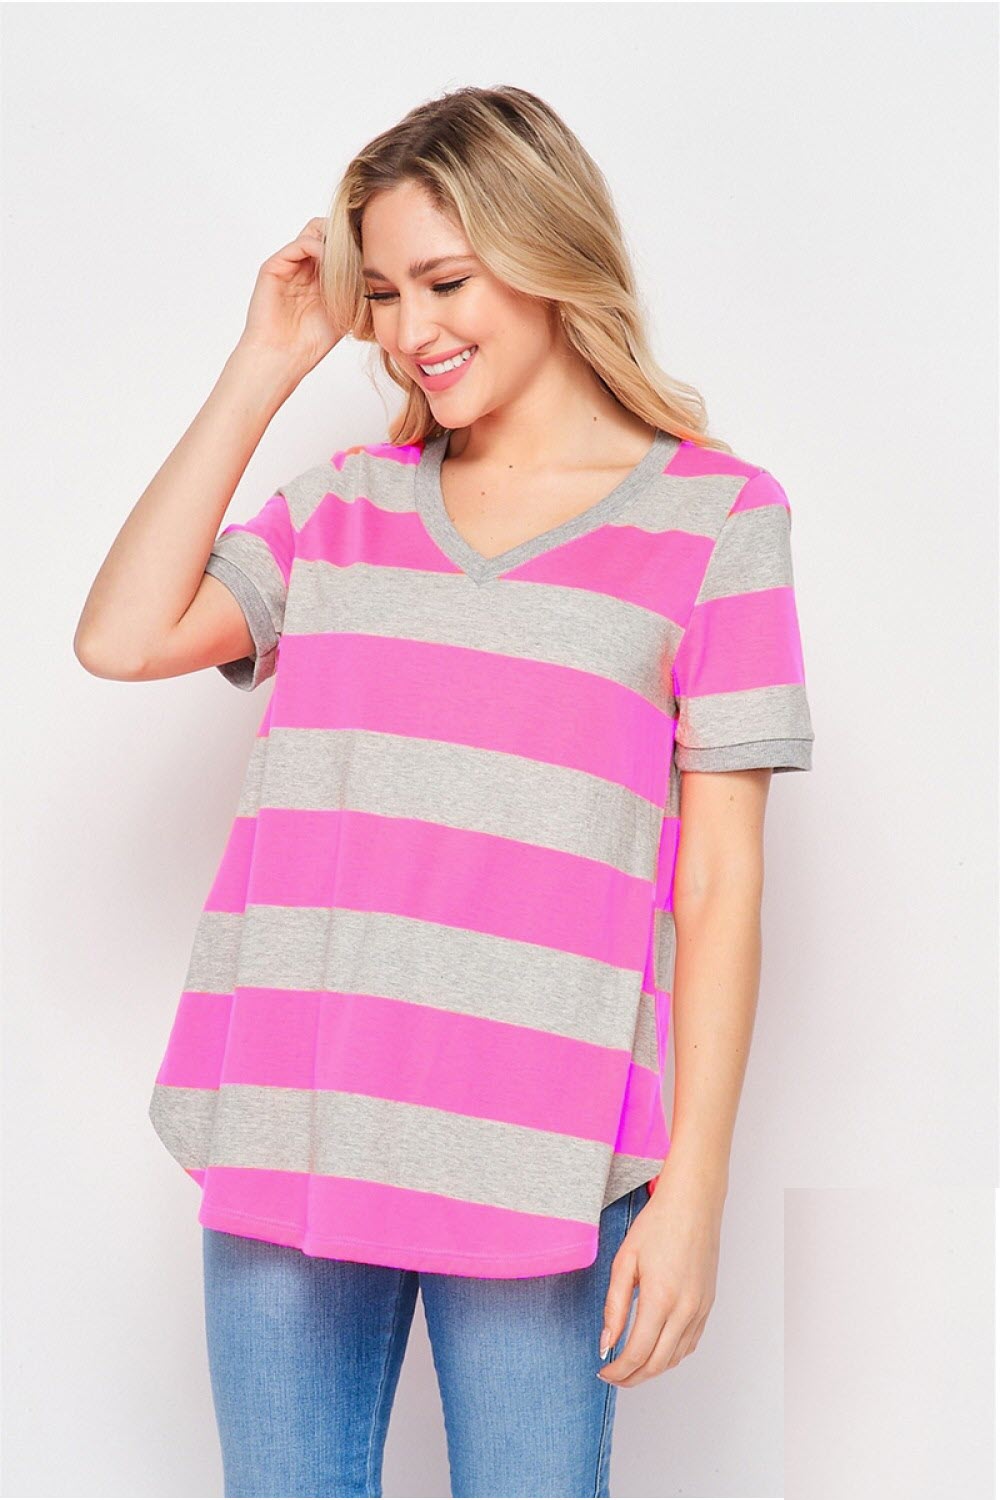 Gray and Hot Pink Striped V-Neck Top  Ivy and Pearl Boutique S  